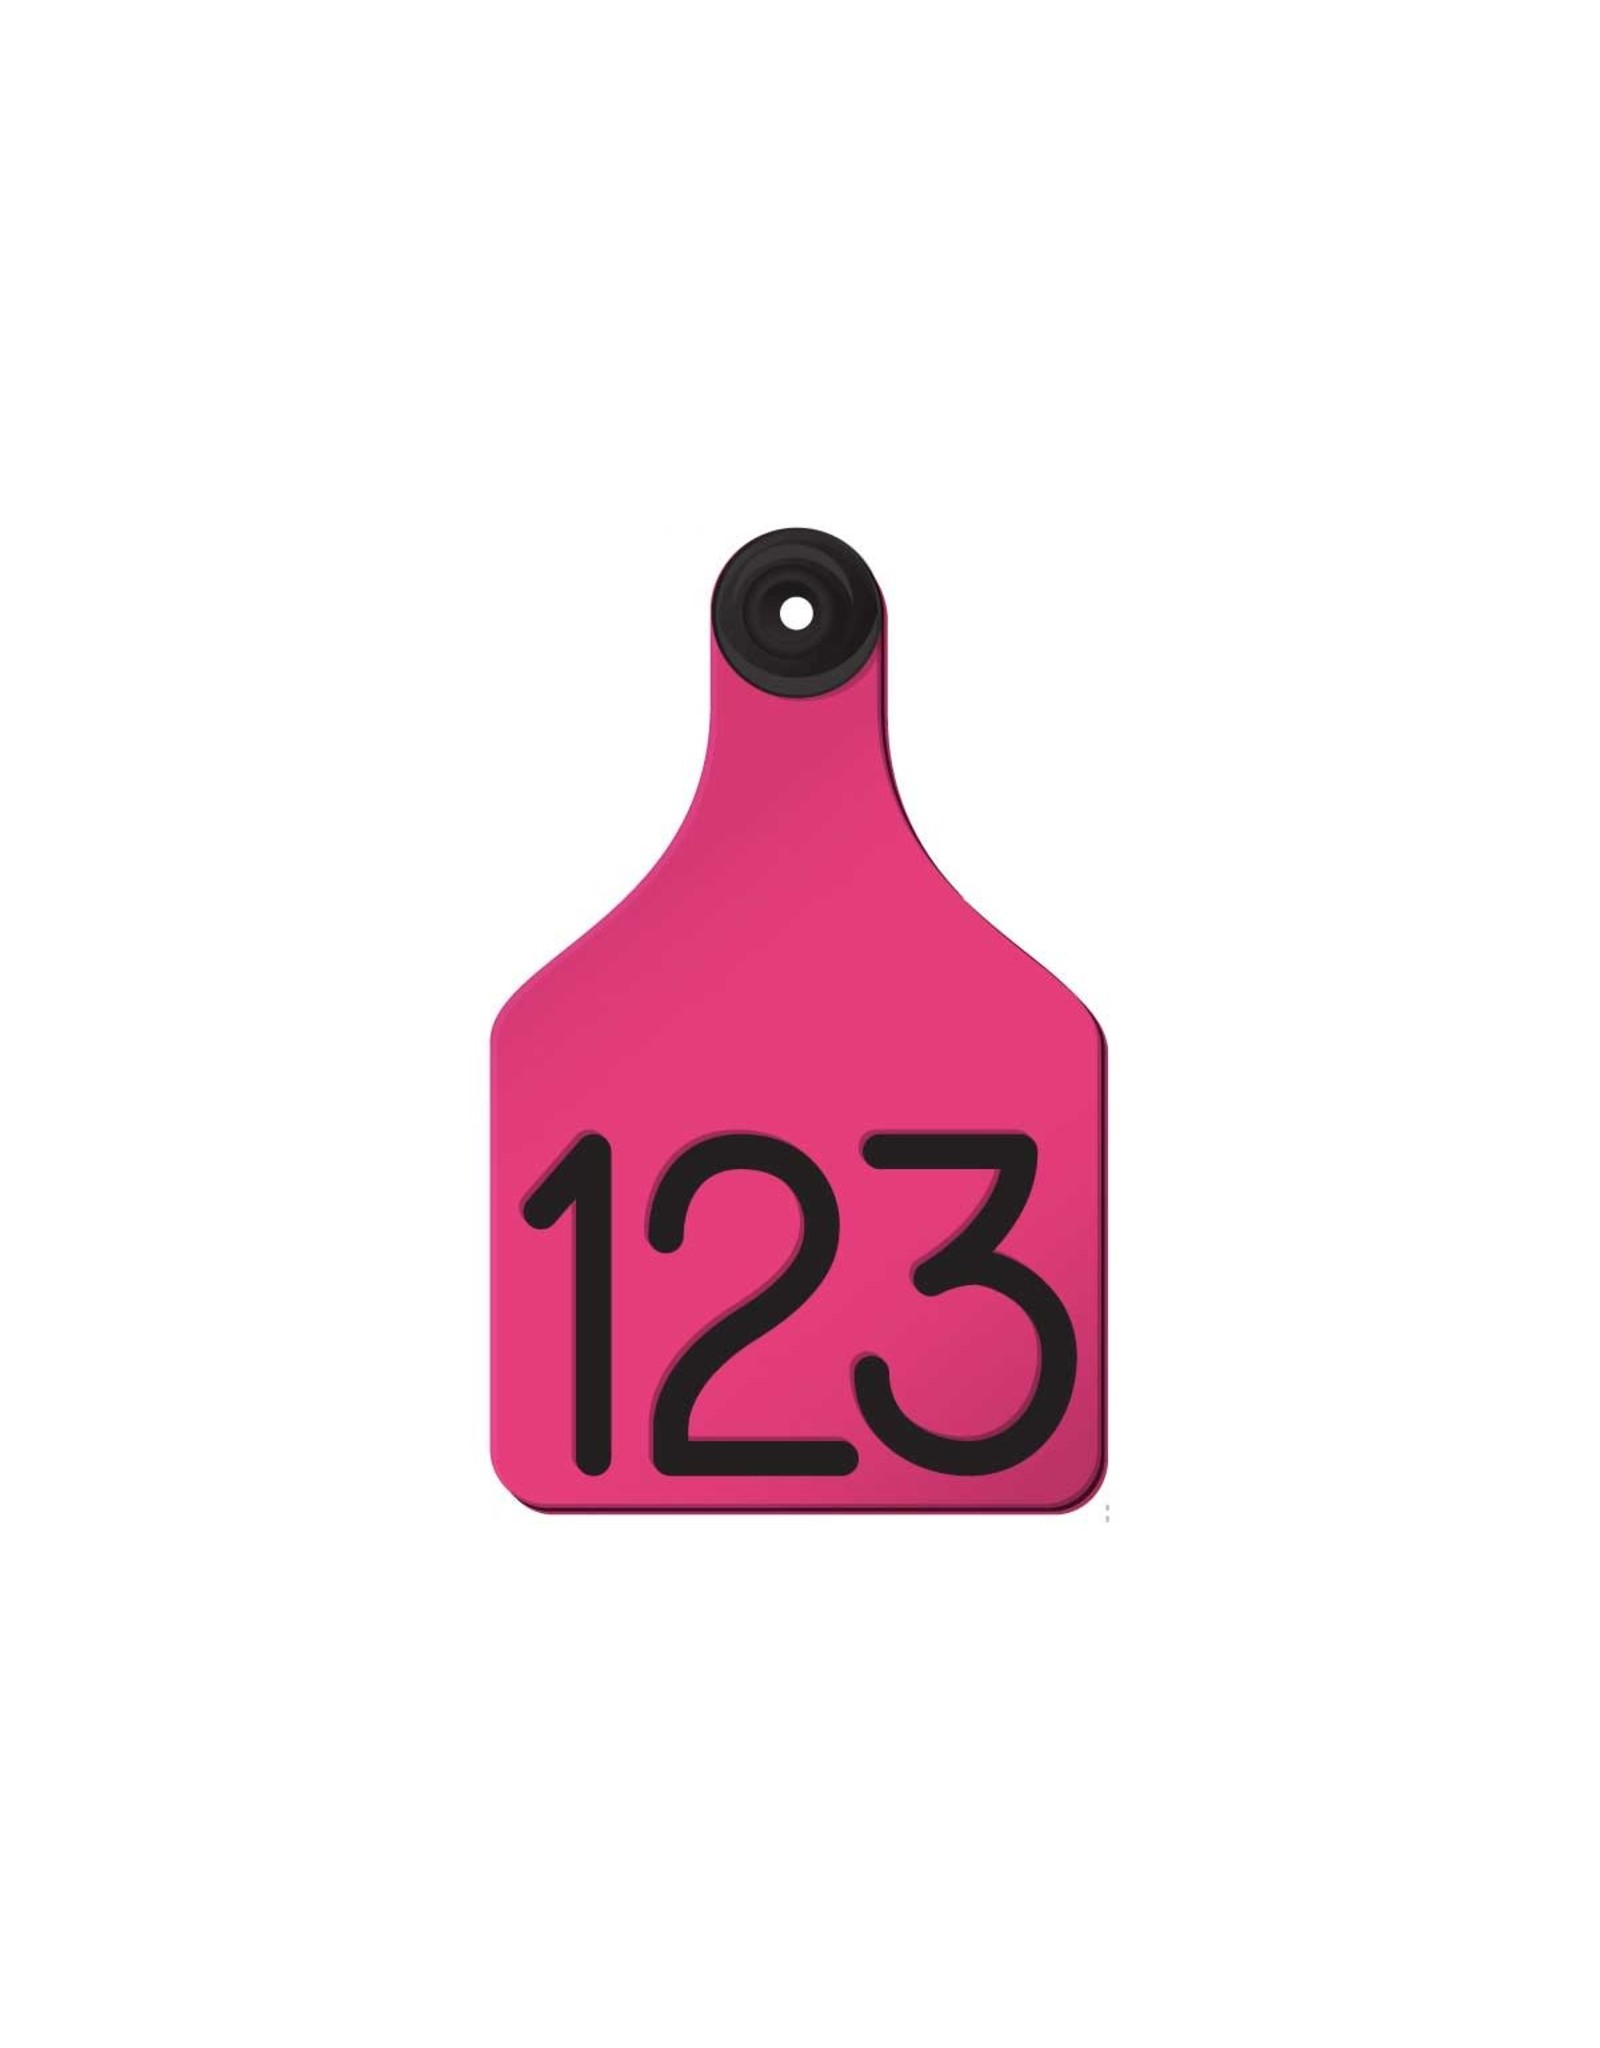 Ritchey TAG* Ritchey - Universal Large -Pink/Black 25pk- 04114 w/Buttons